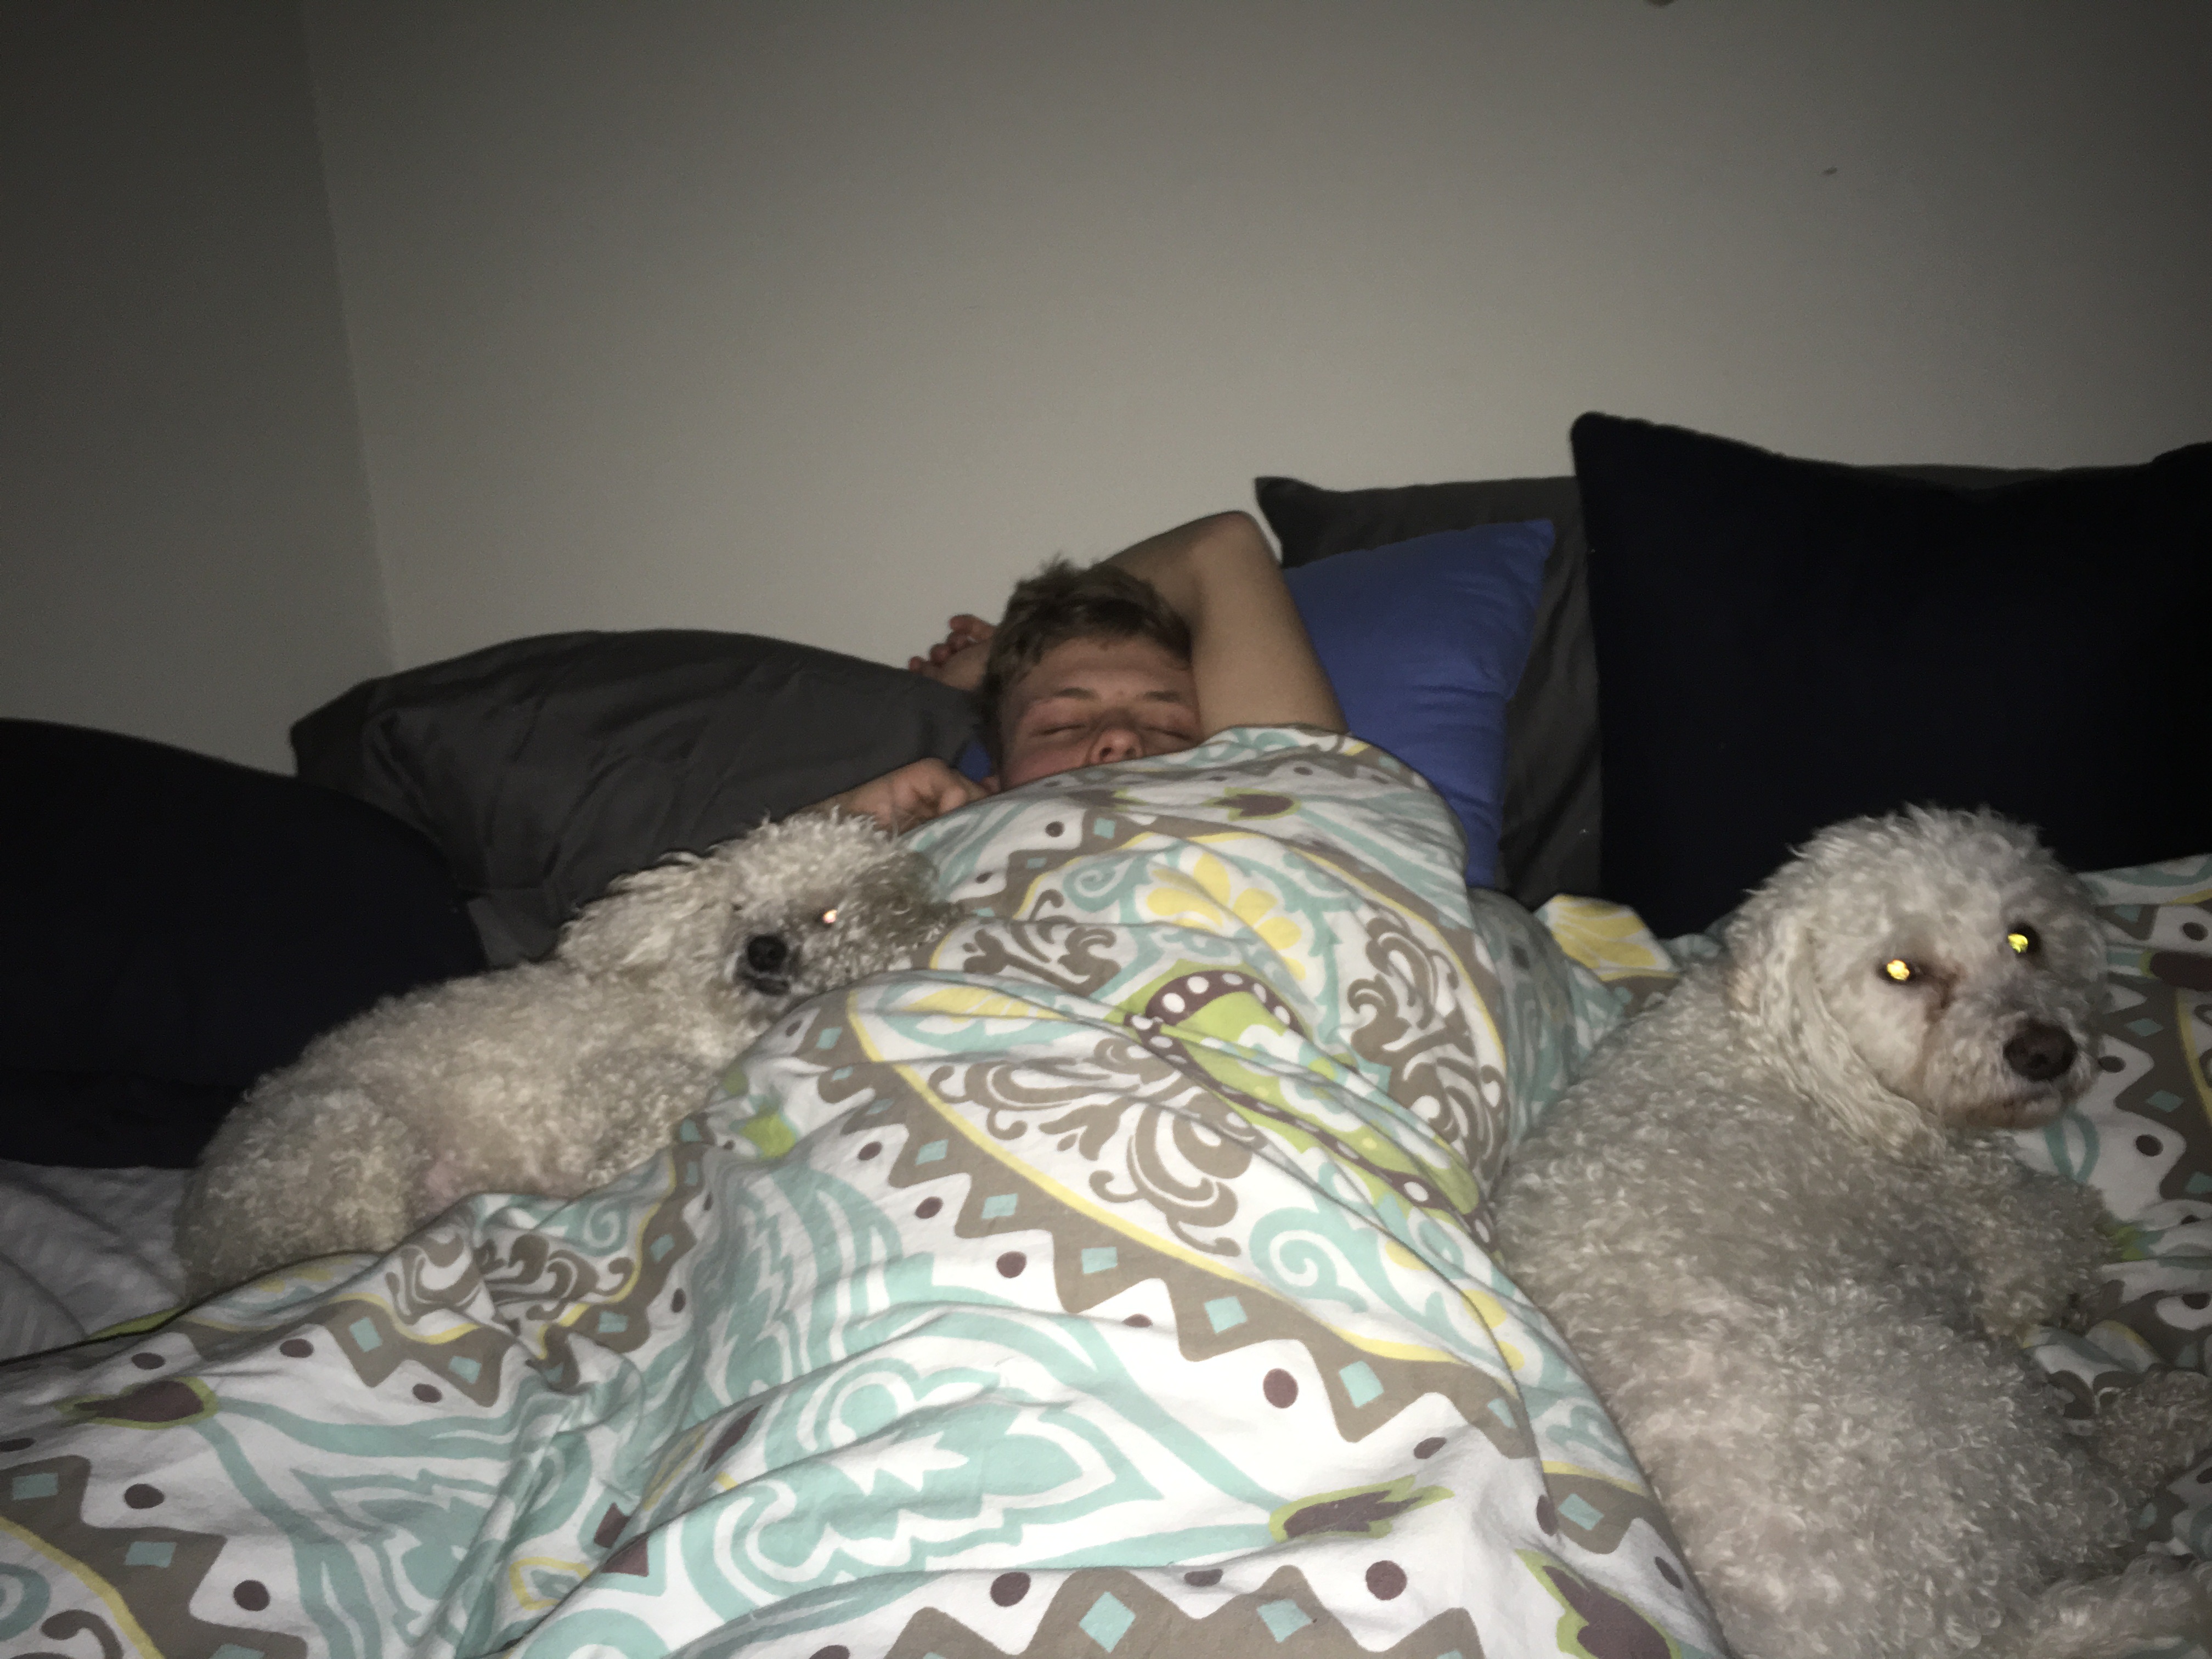 This is an image of Joel and my two dogs